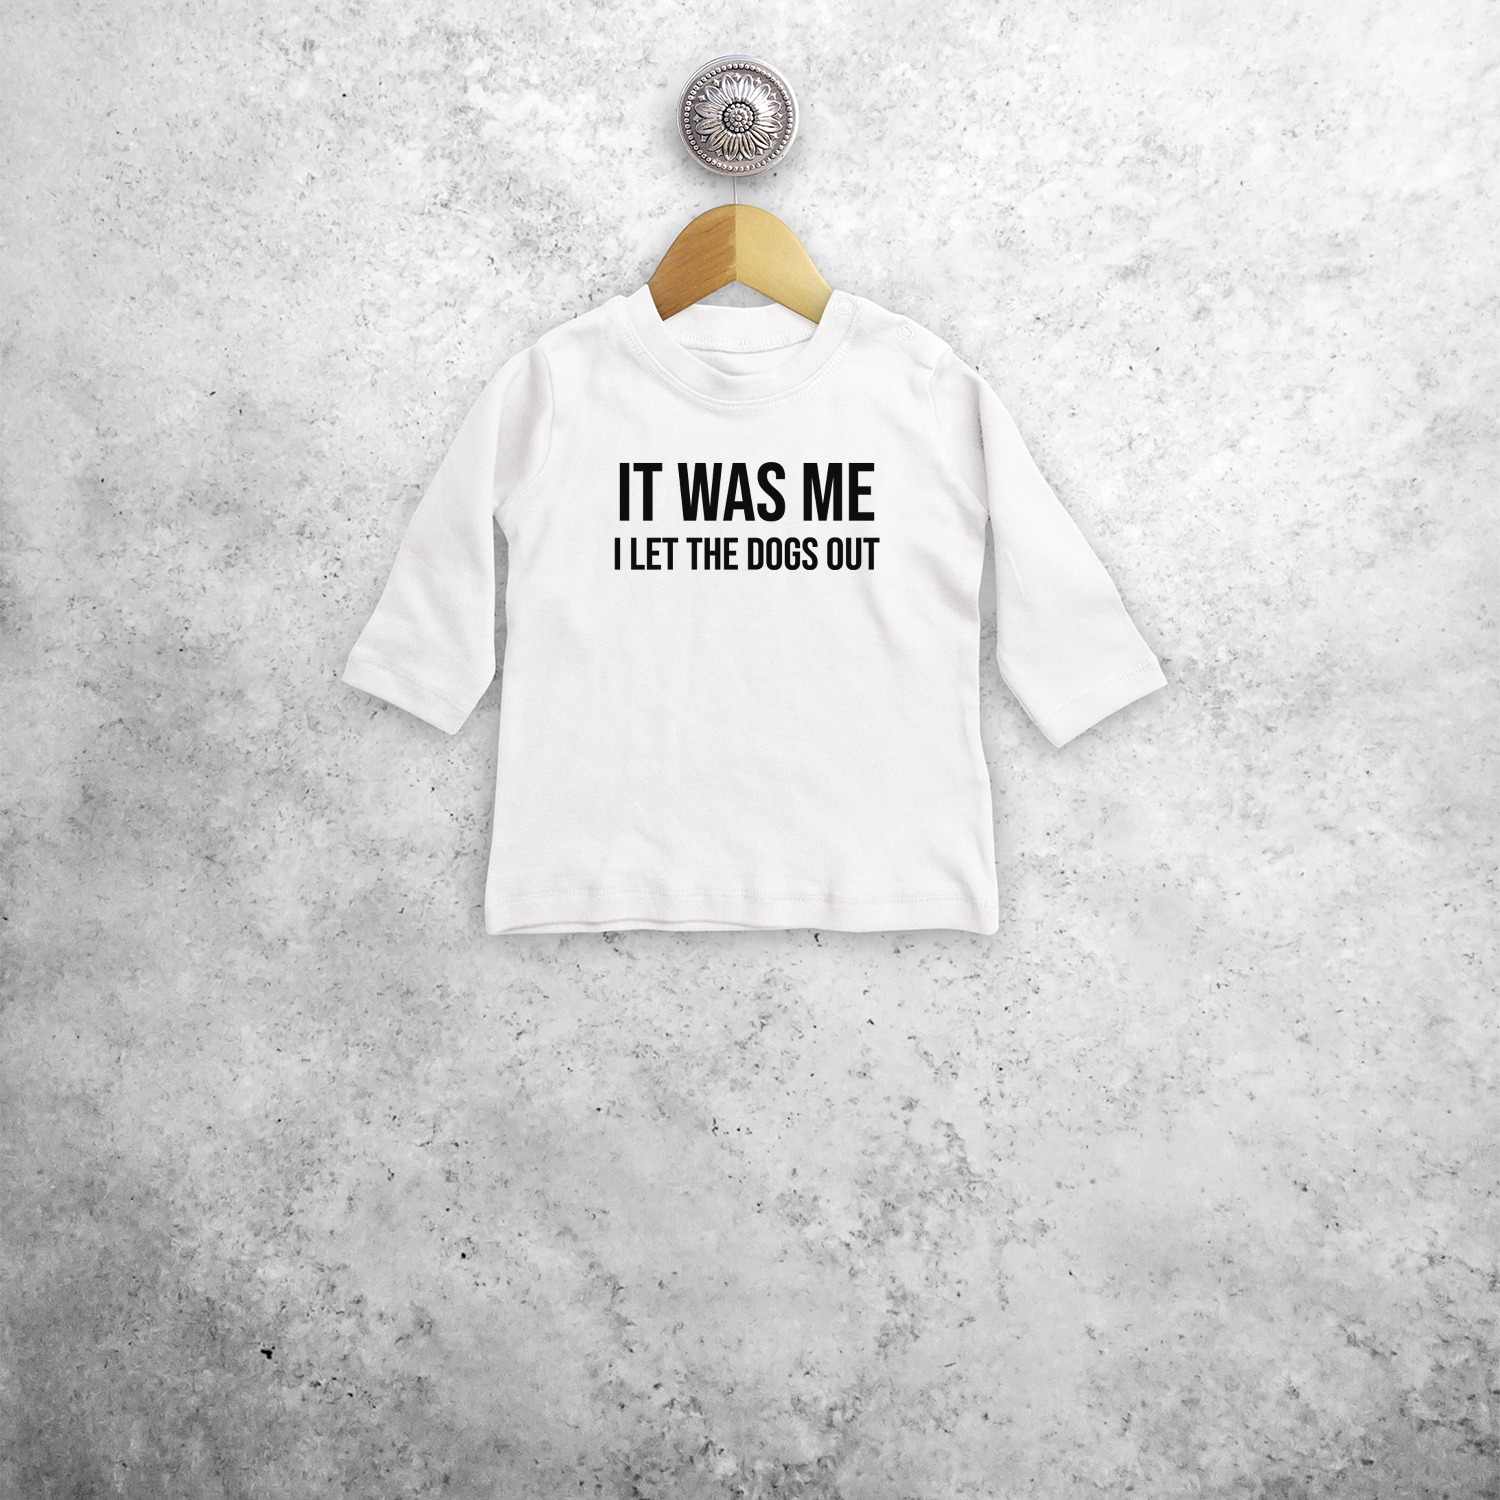 'It was me - I let the dogs out' baby longsleeve shirt